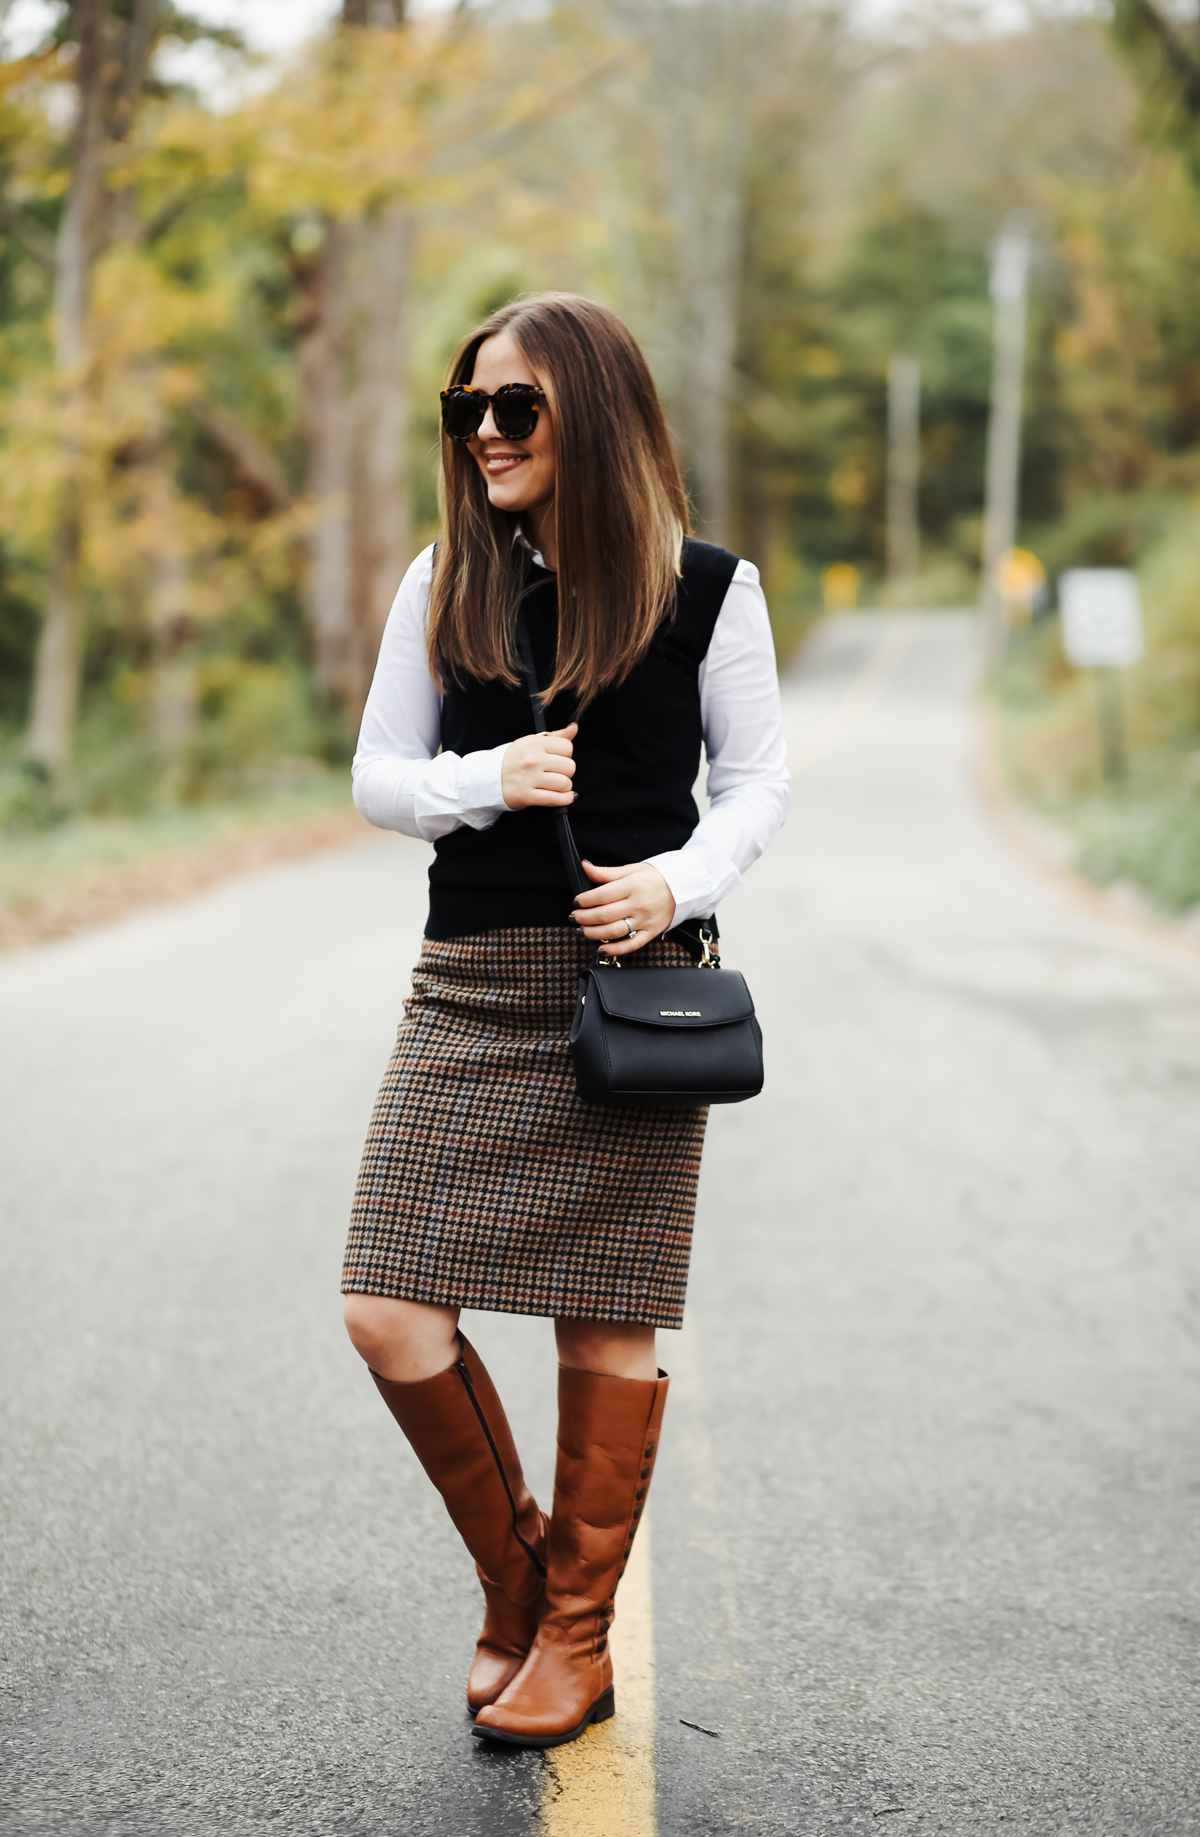 preppy fall outfit with riding boots and tweed skirt-4 - dress cori lynn